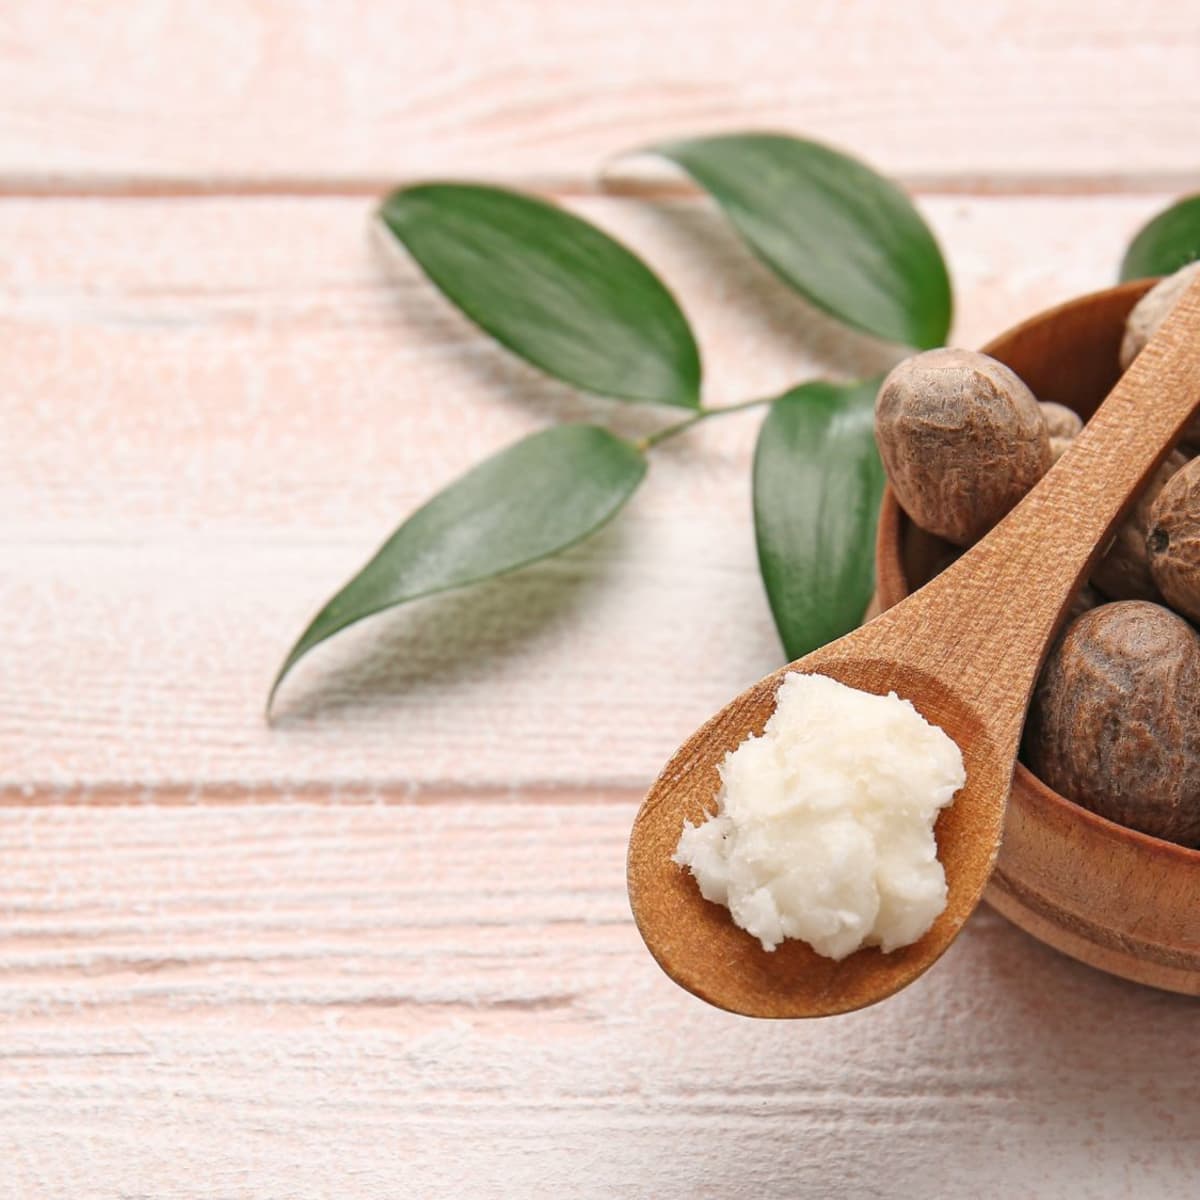 Shea Butter Benefits for Skin and Hair and Facial Moisturizer Recipe photo